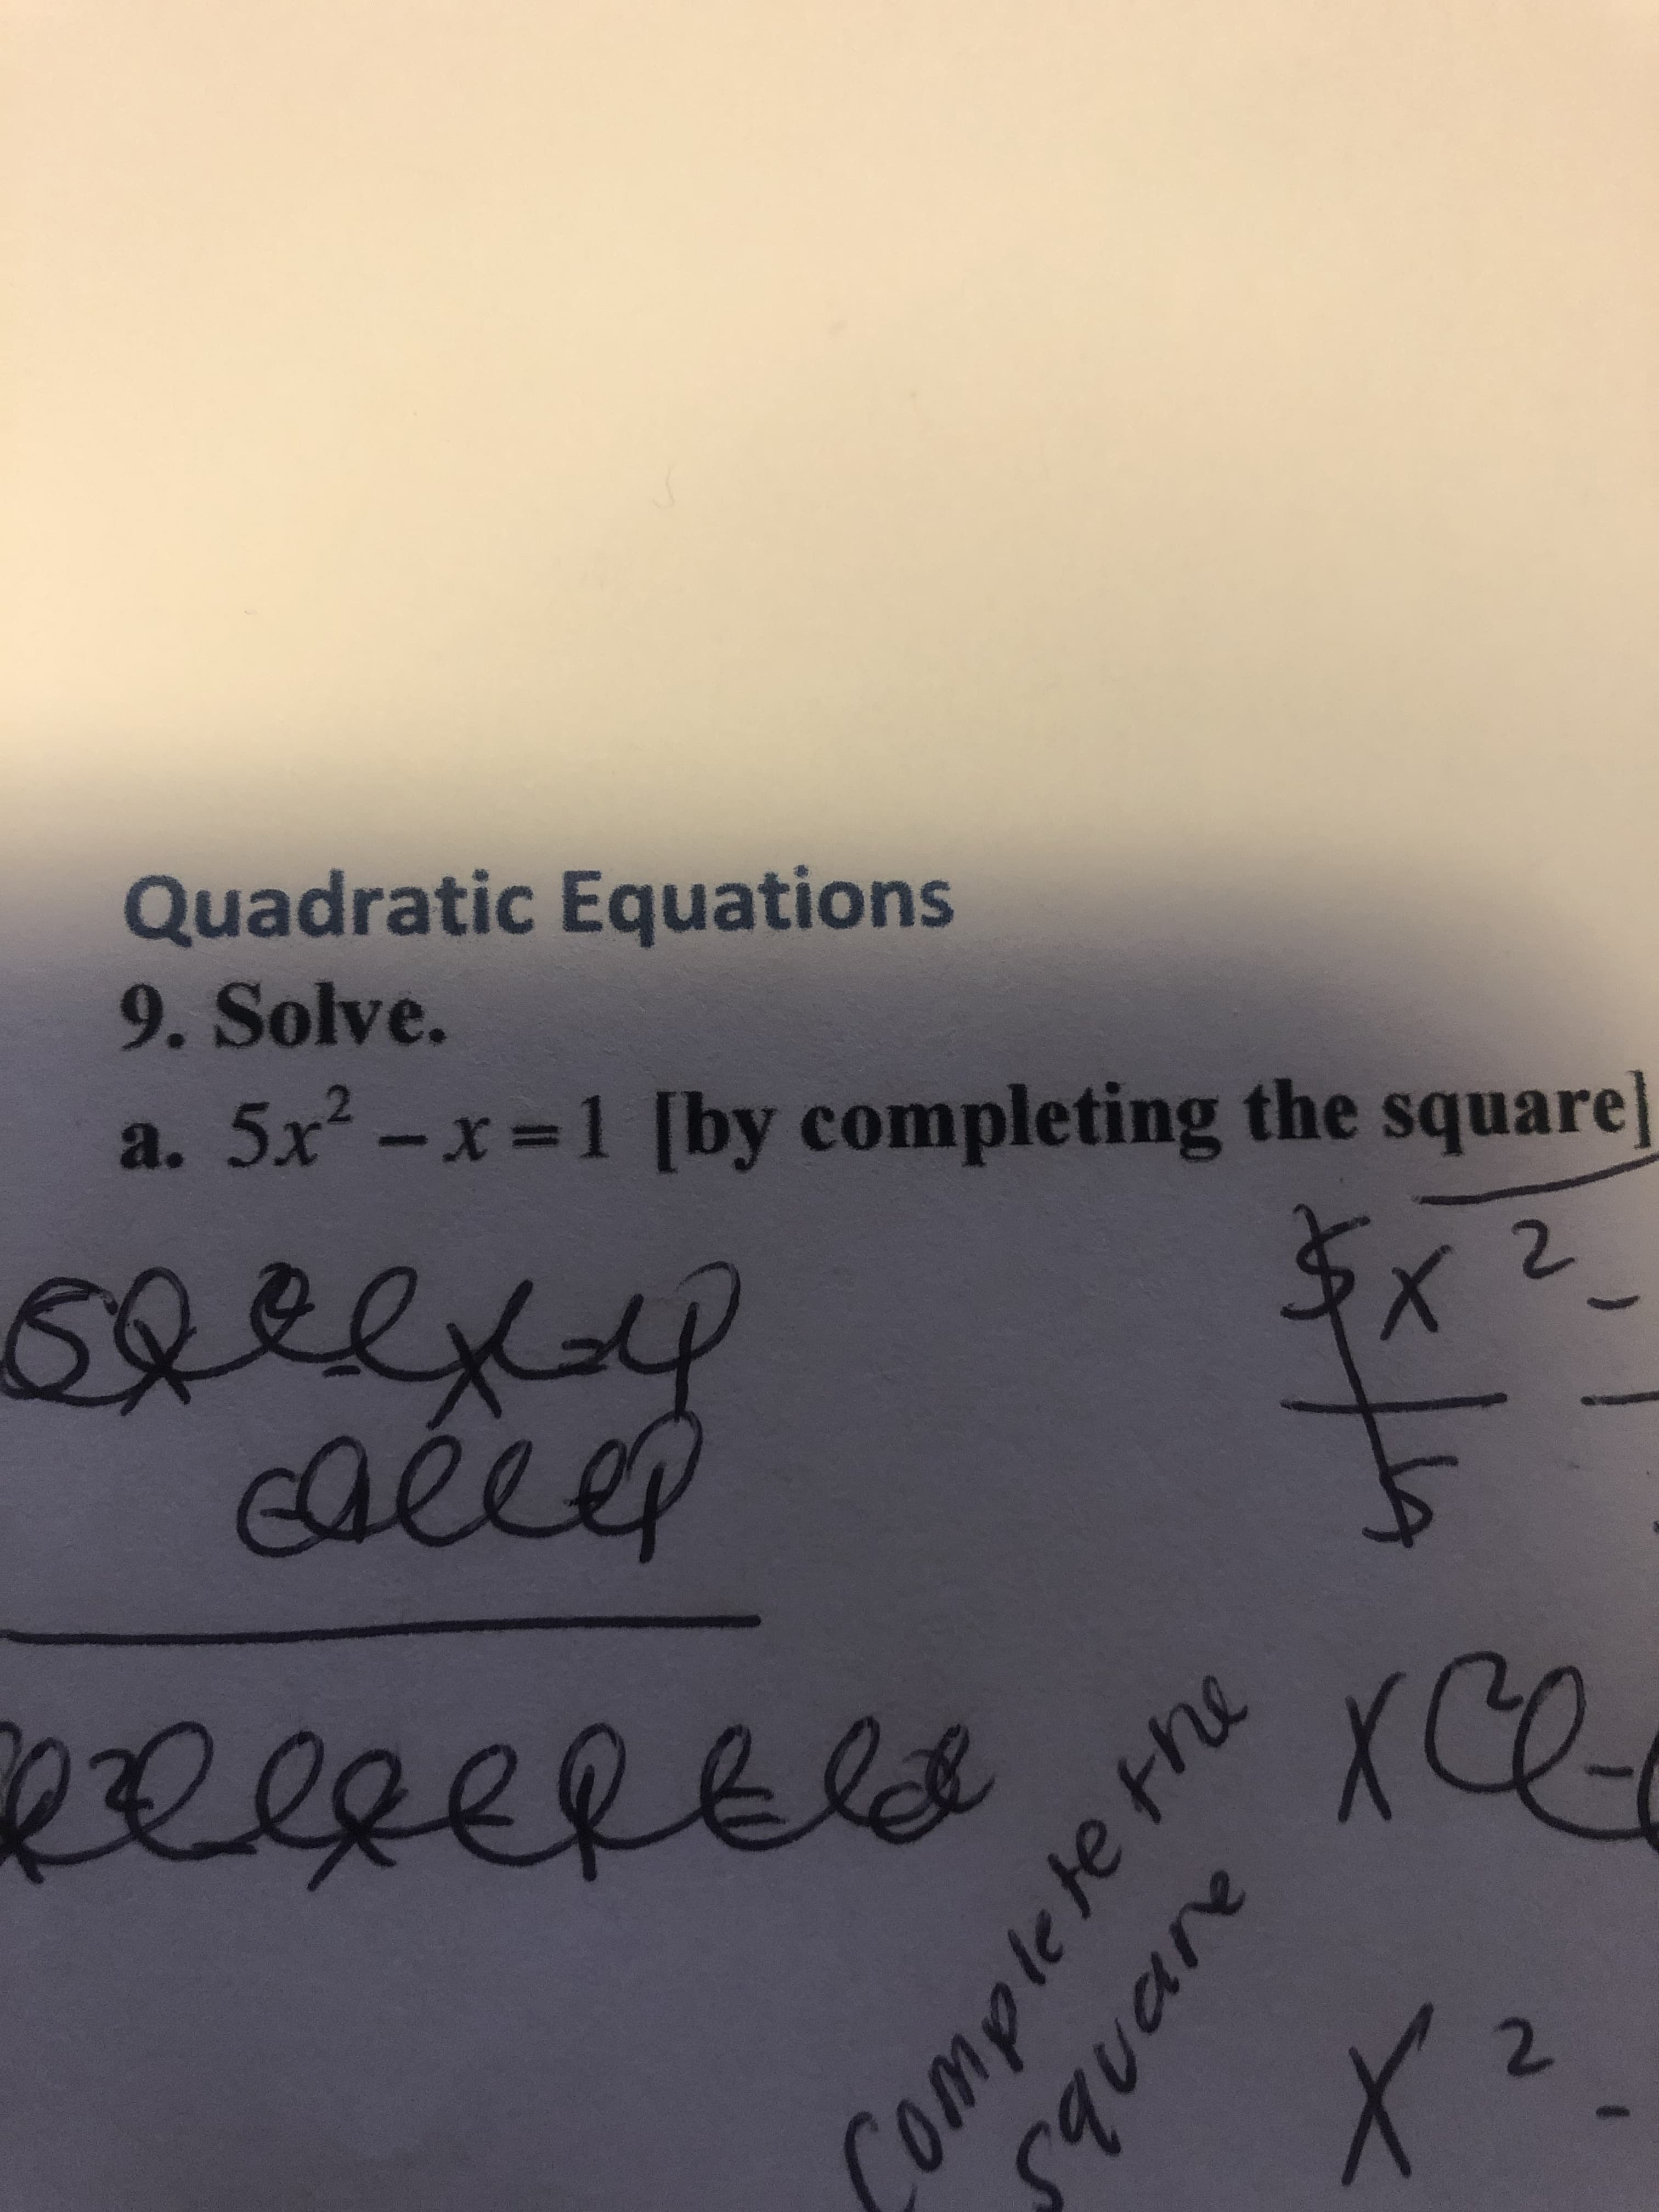 Complete the
dwo
Quadratic Equations
9. Solve.
a. 5x-x 1 [by completing the square]
callep
2.
